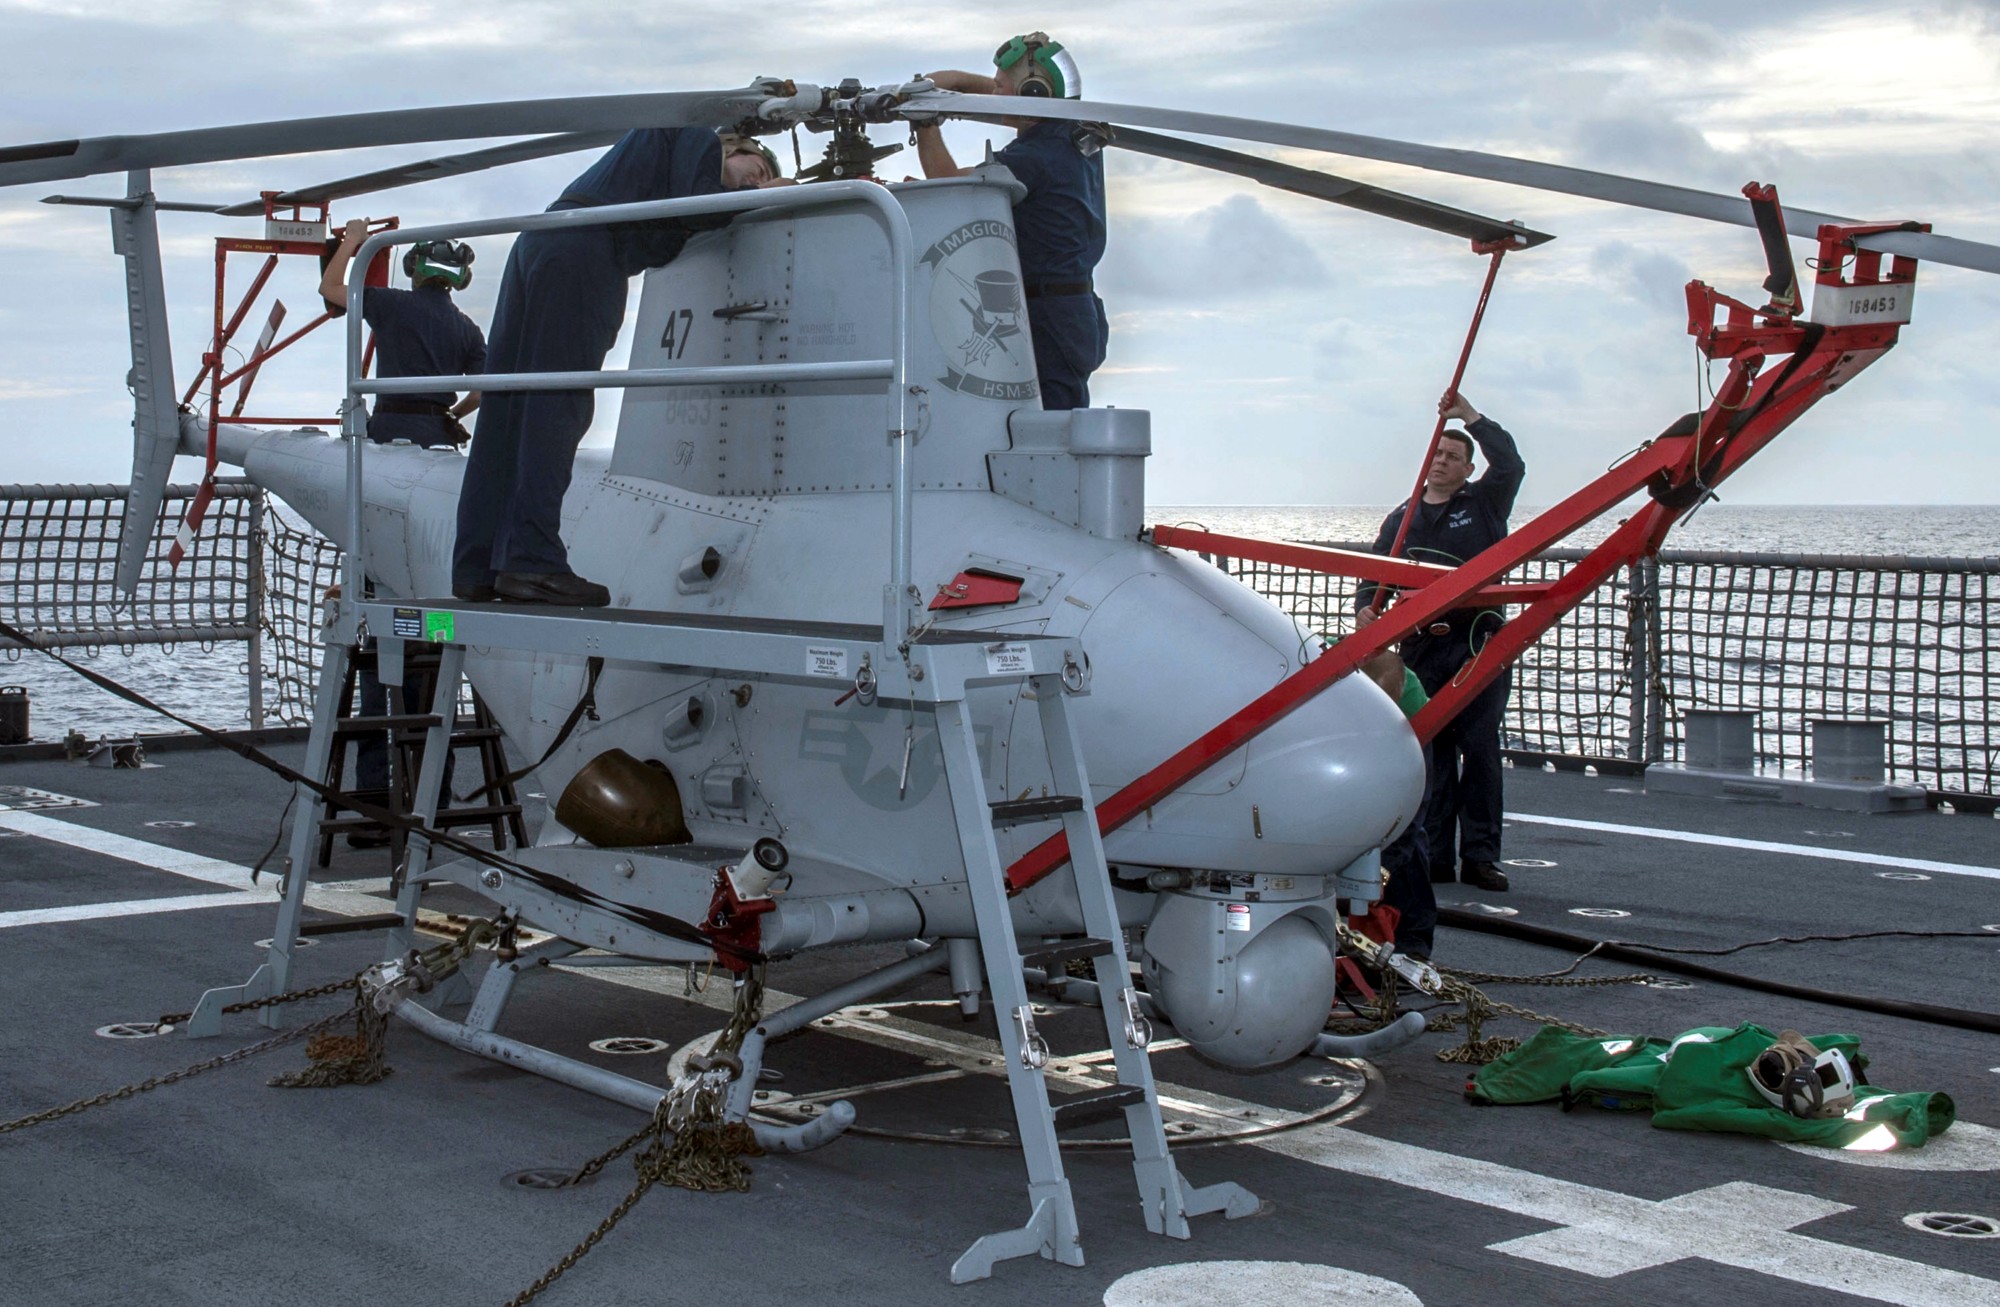 hsm-35 magicians helicopter maritime strike squadron us navy mq-8b fire scout uav uss fort worth lcs-3 20